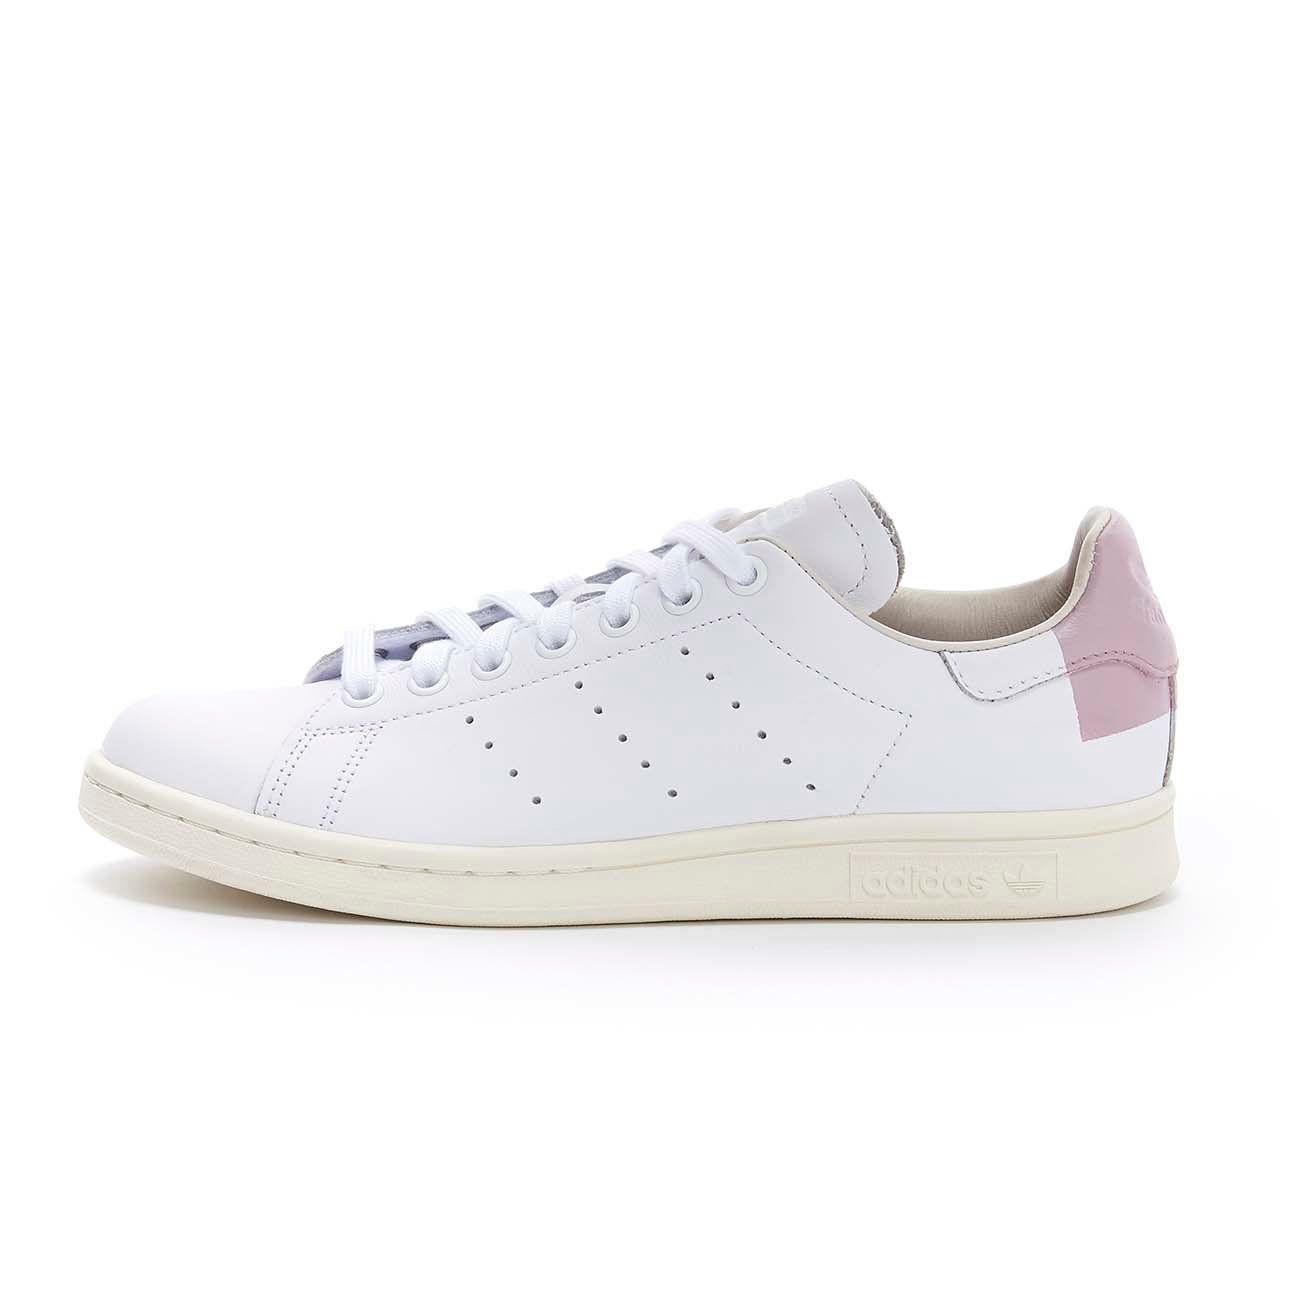 The adidas Stan Smith Lux Dresses in Crystal White and Grey